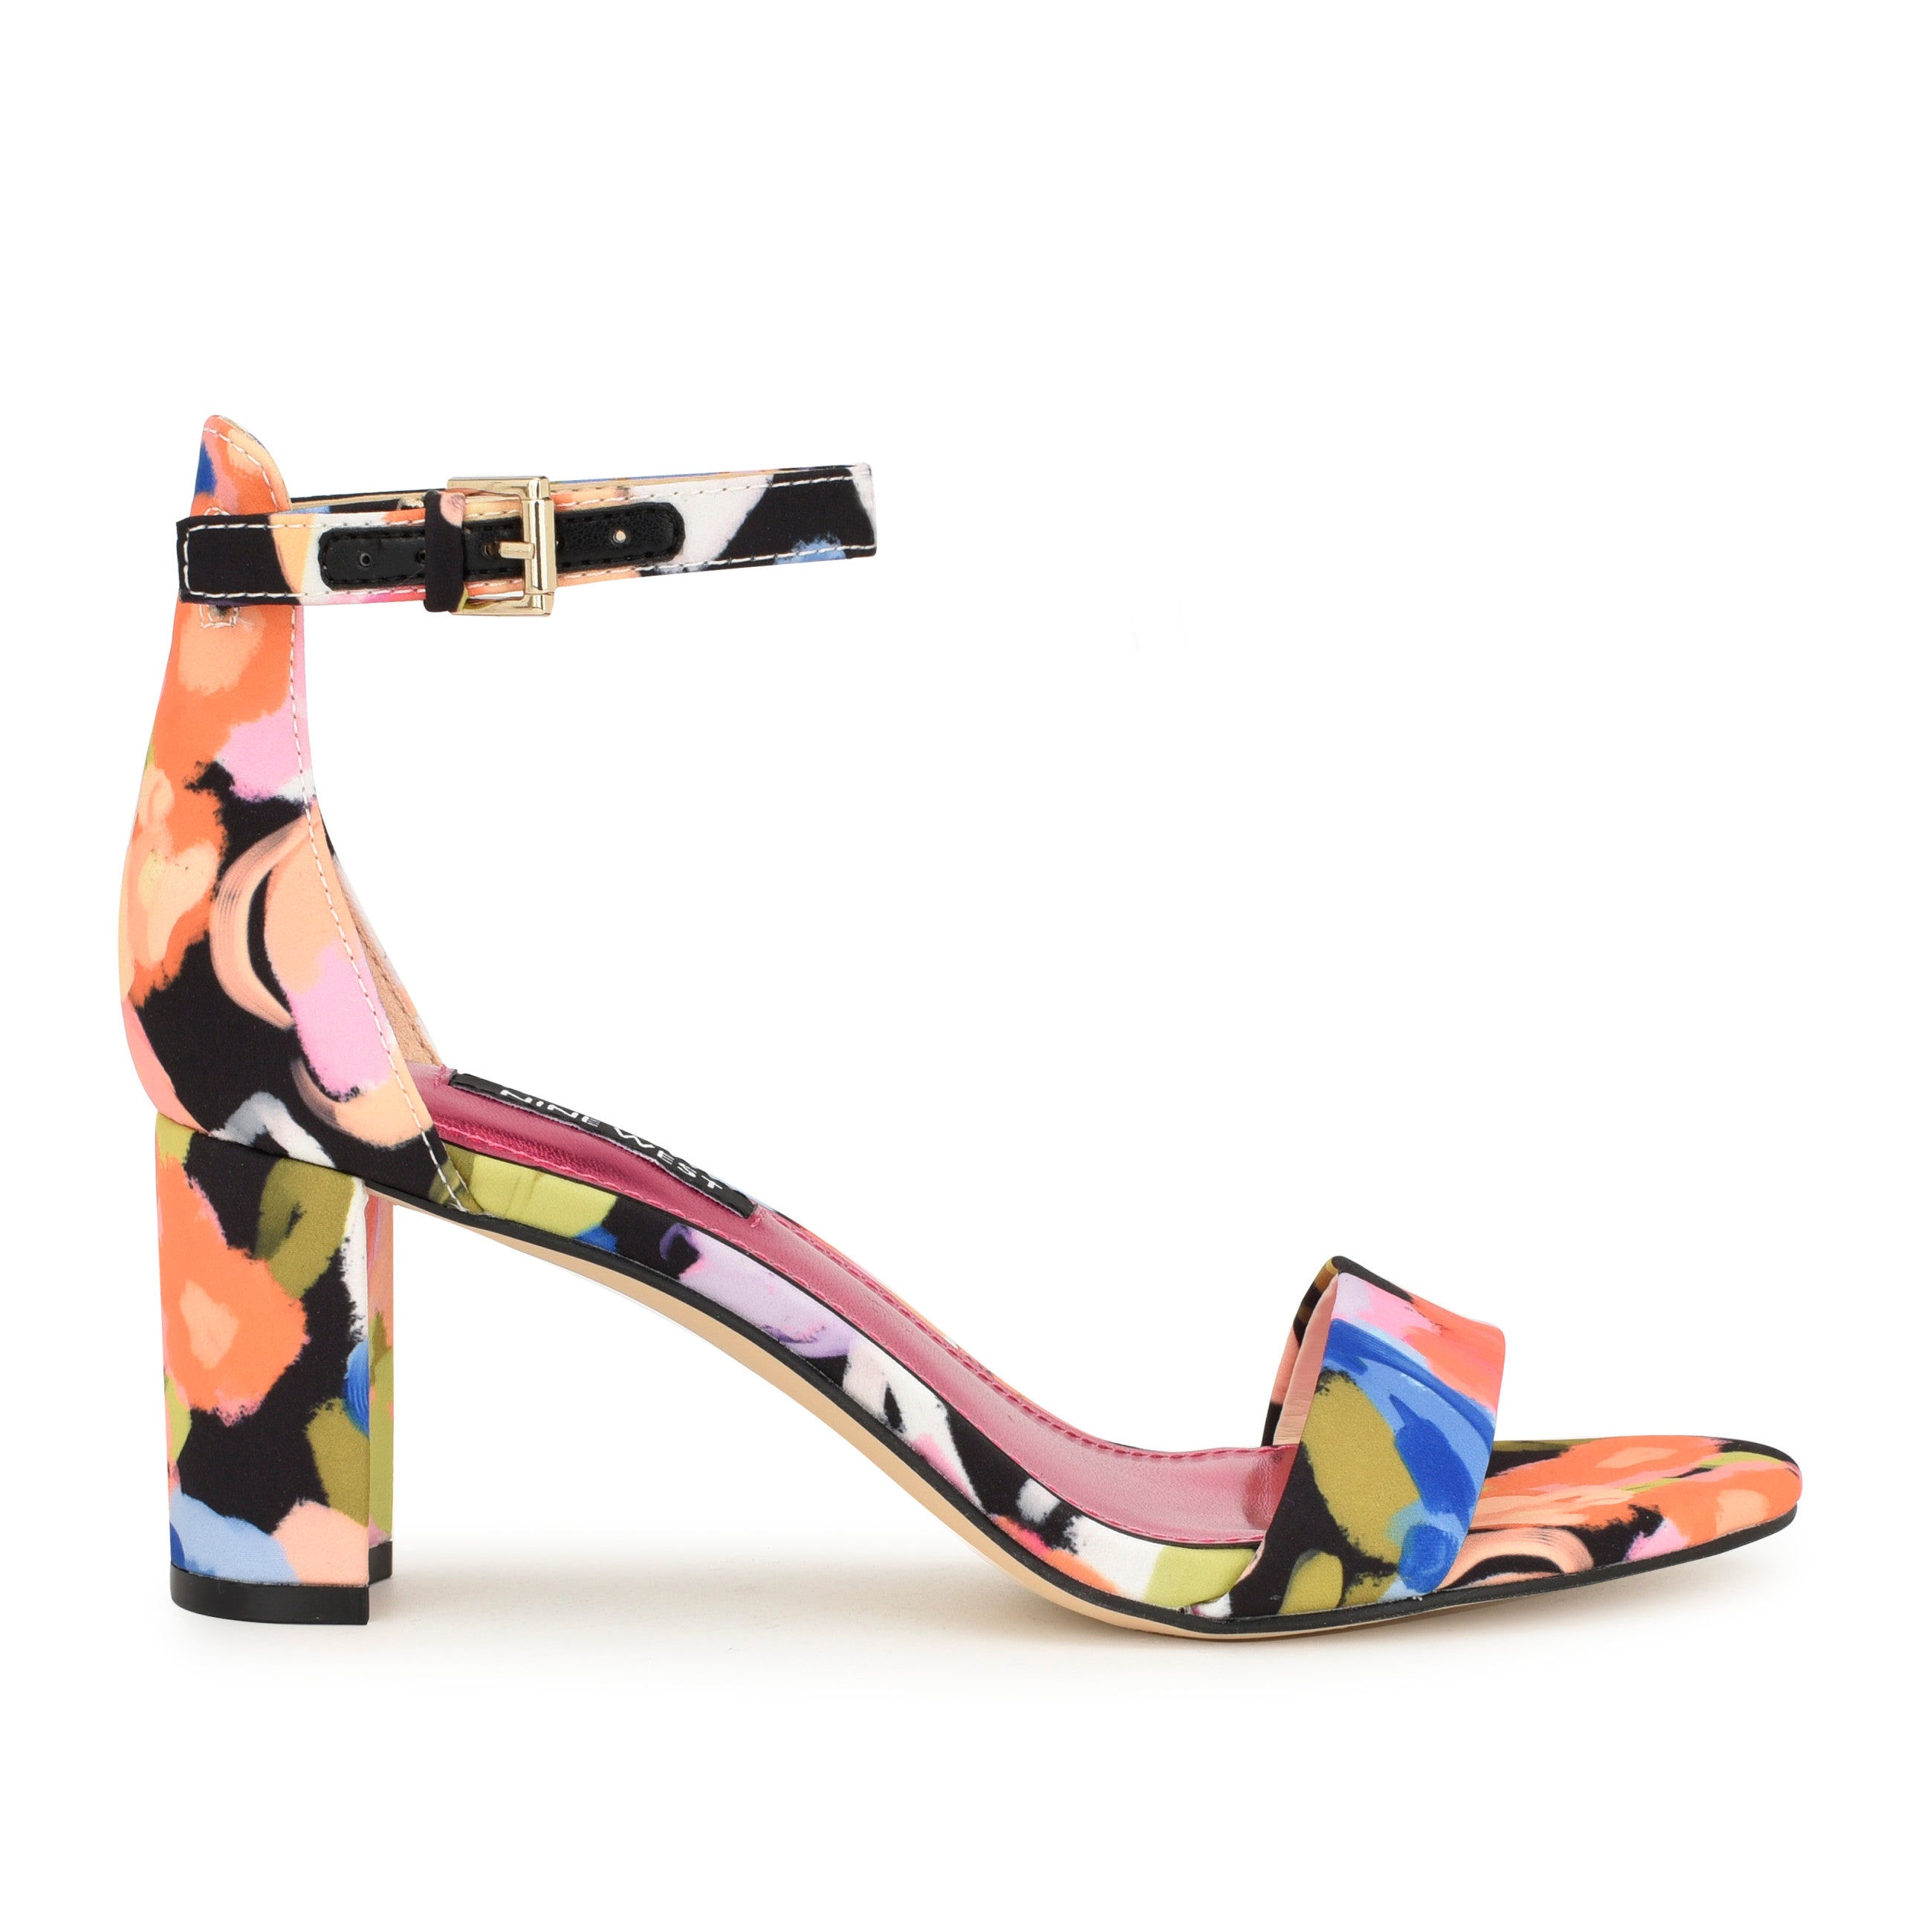 Floral Painted Satin Platform Block Heel Sandals With Leopard Print Buckle  Open Toe Square Toes For Women Sizes 34 43 Style 0111 From Vibratorsex,  $79.98 | DHgate.Com